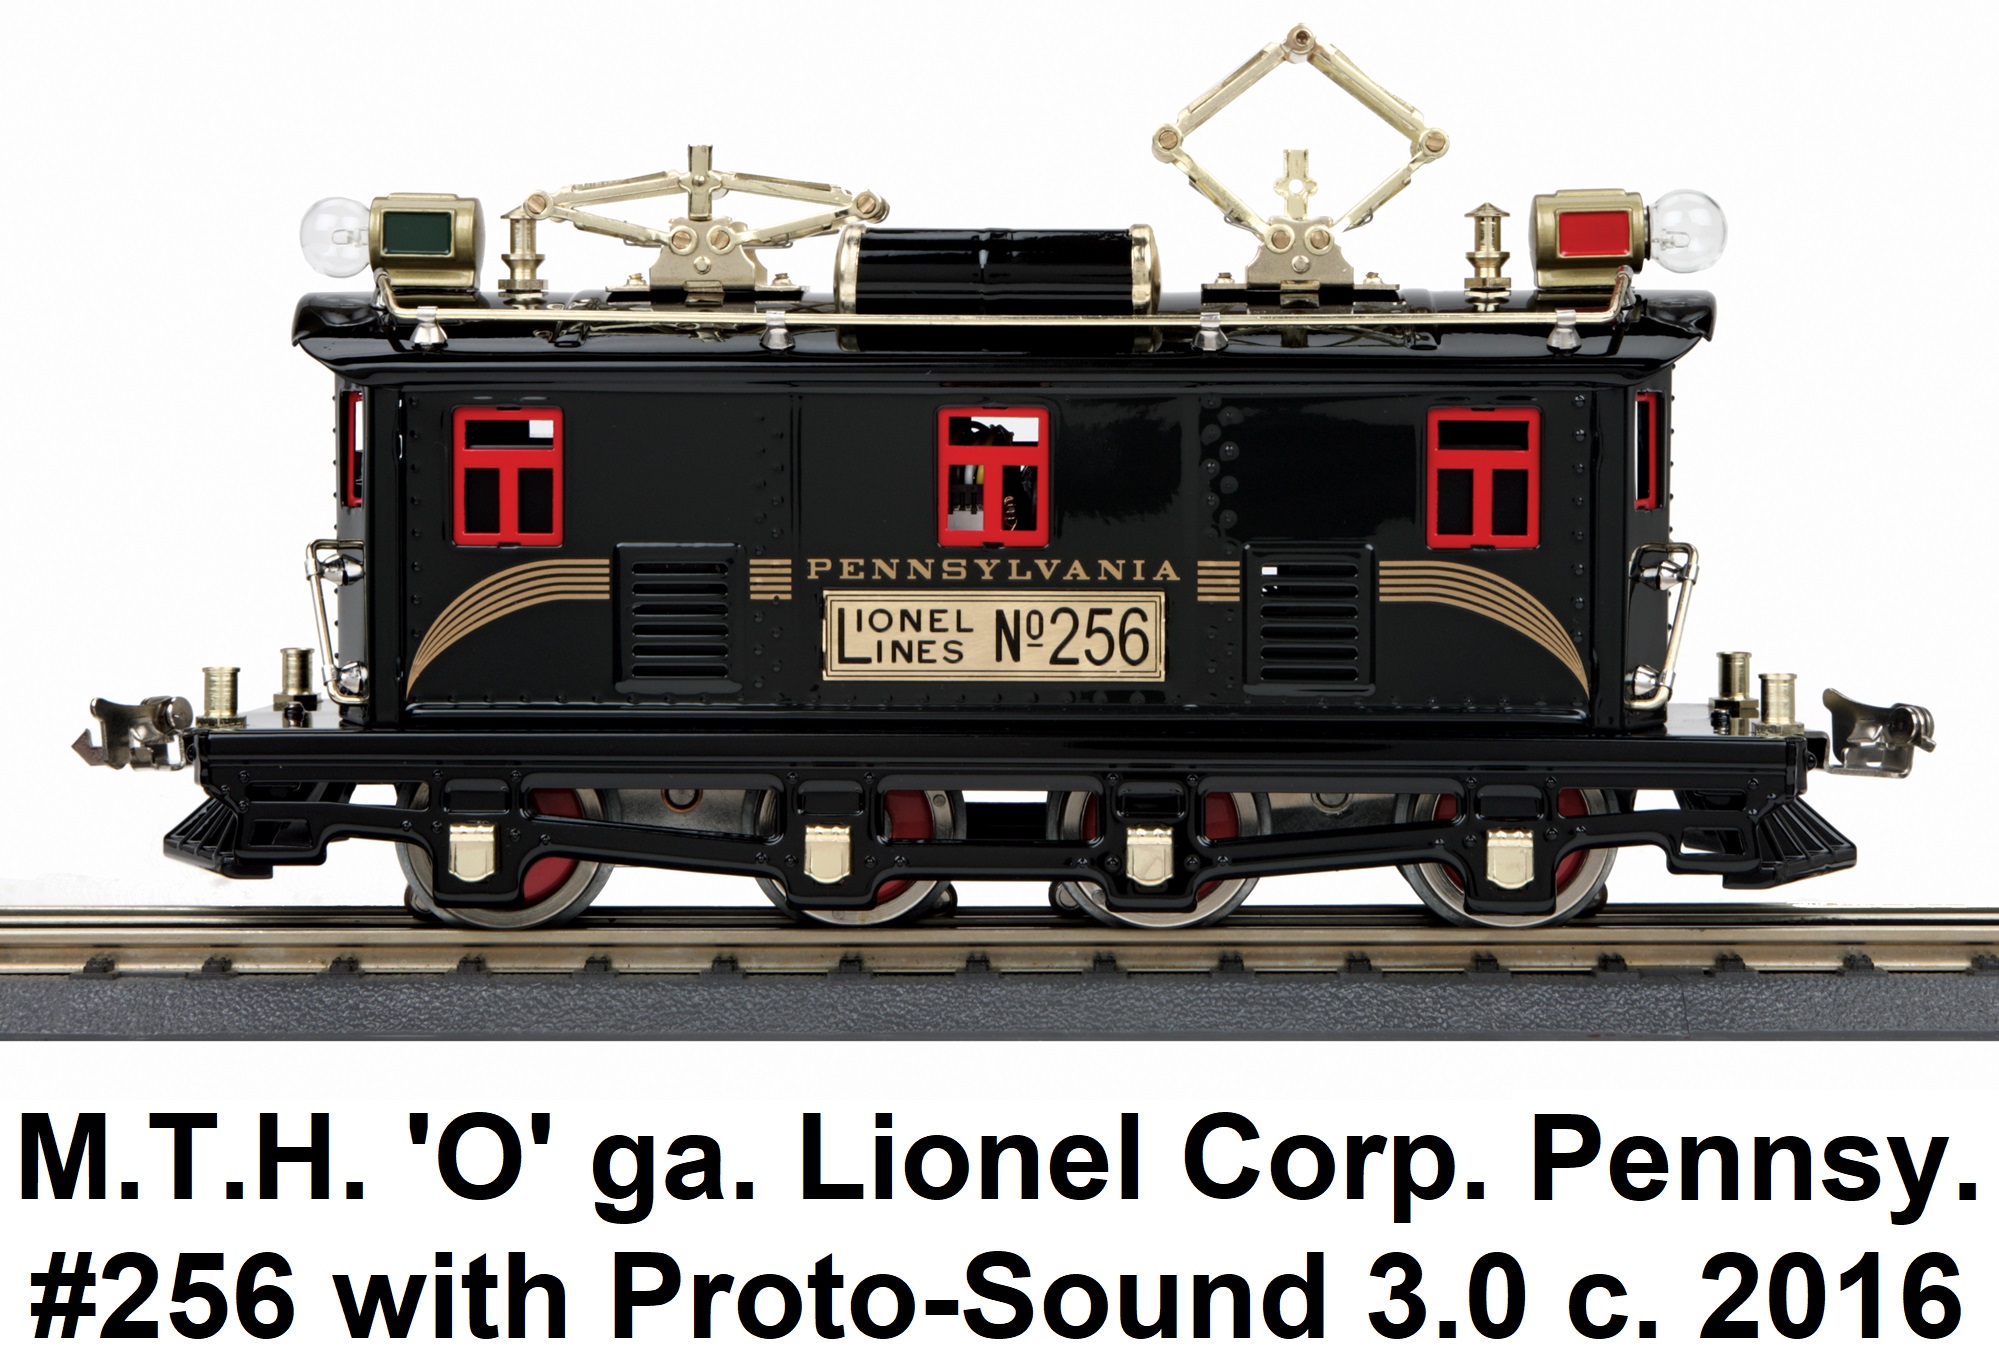 MTH 'O' gauge Lionel Corporation Tinplate #256 Pennsylvania Electric with Proto-Sound 3.0 made 2016